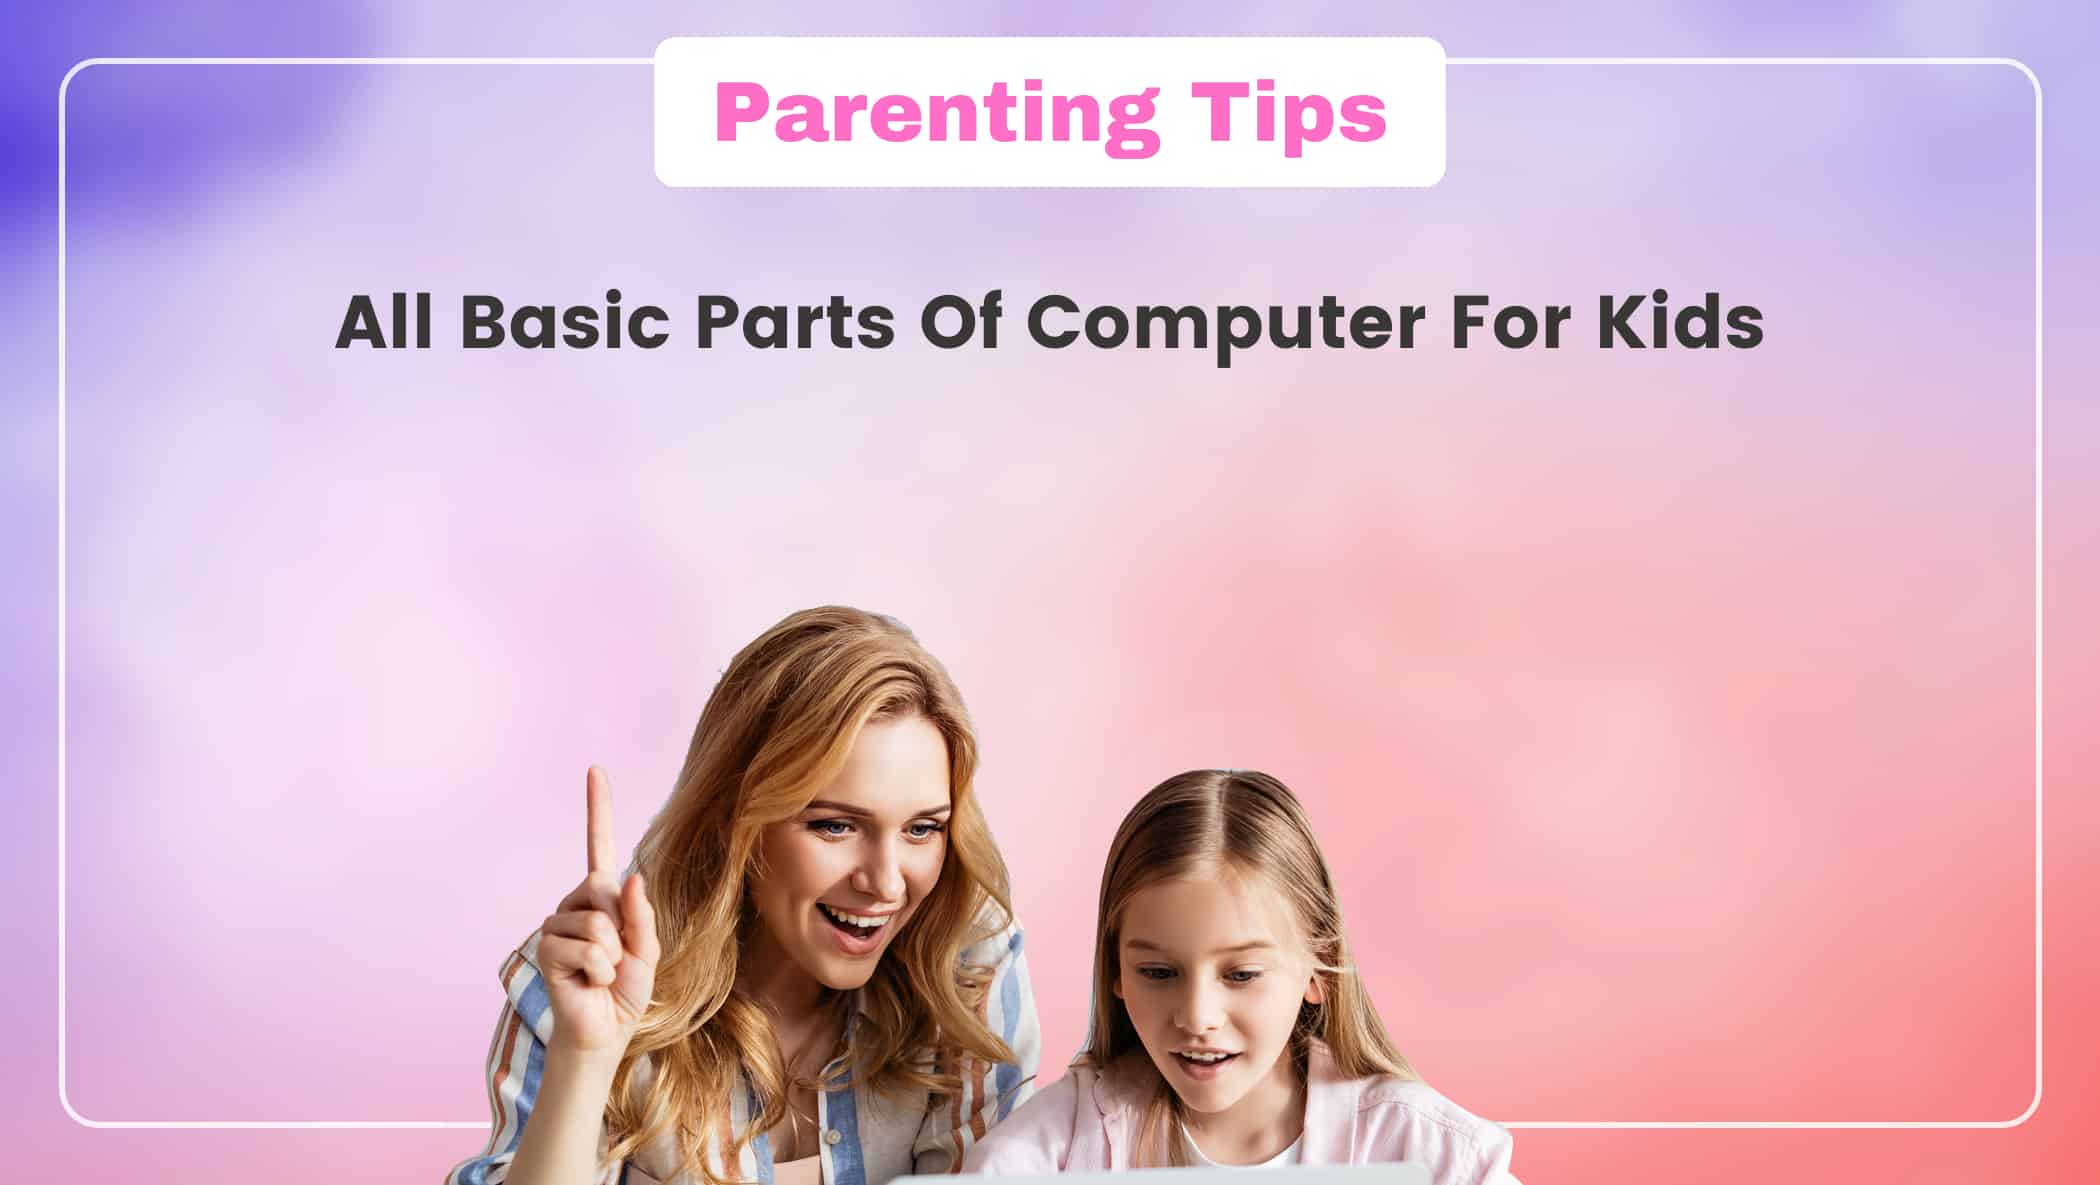 All Basic Parts Of Computer For Kids Image